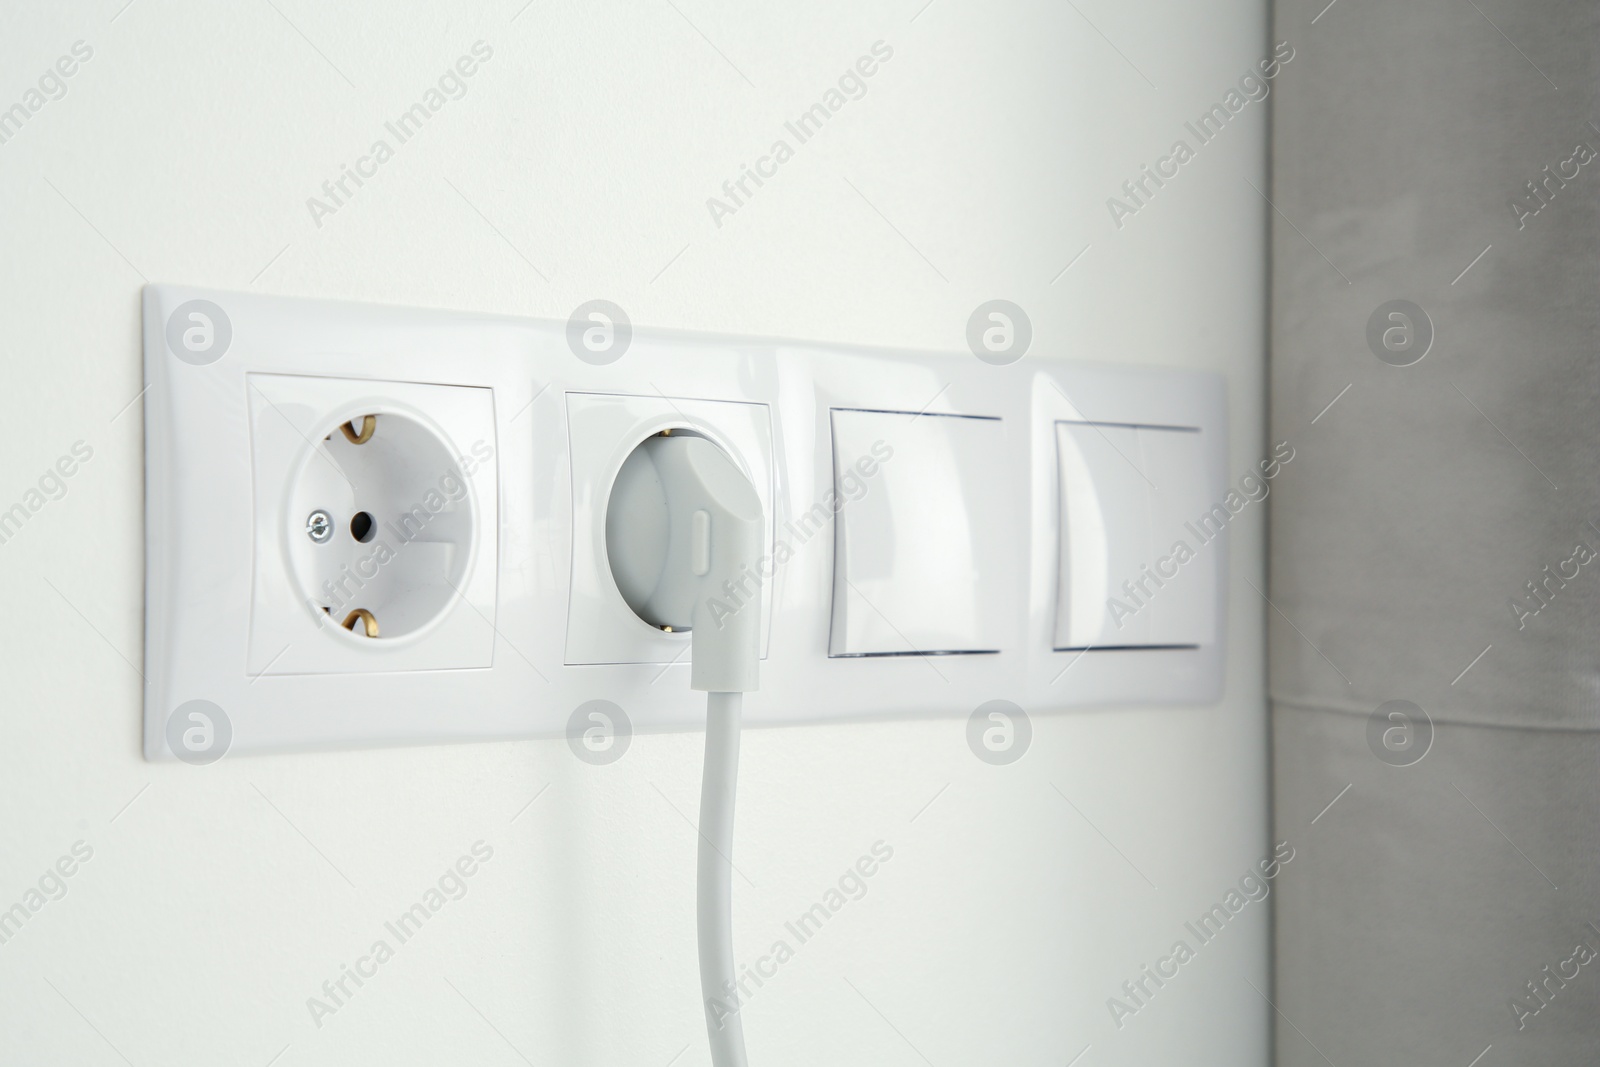 Photo of Power sockets with inserted plug and light switches on white wall indoors